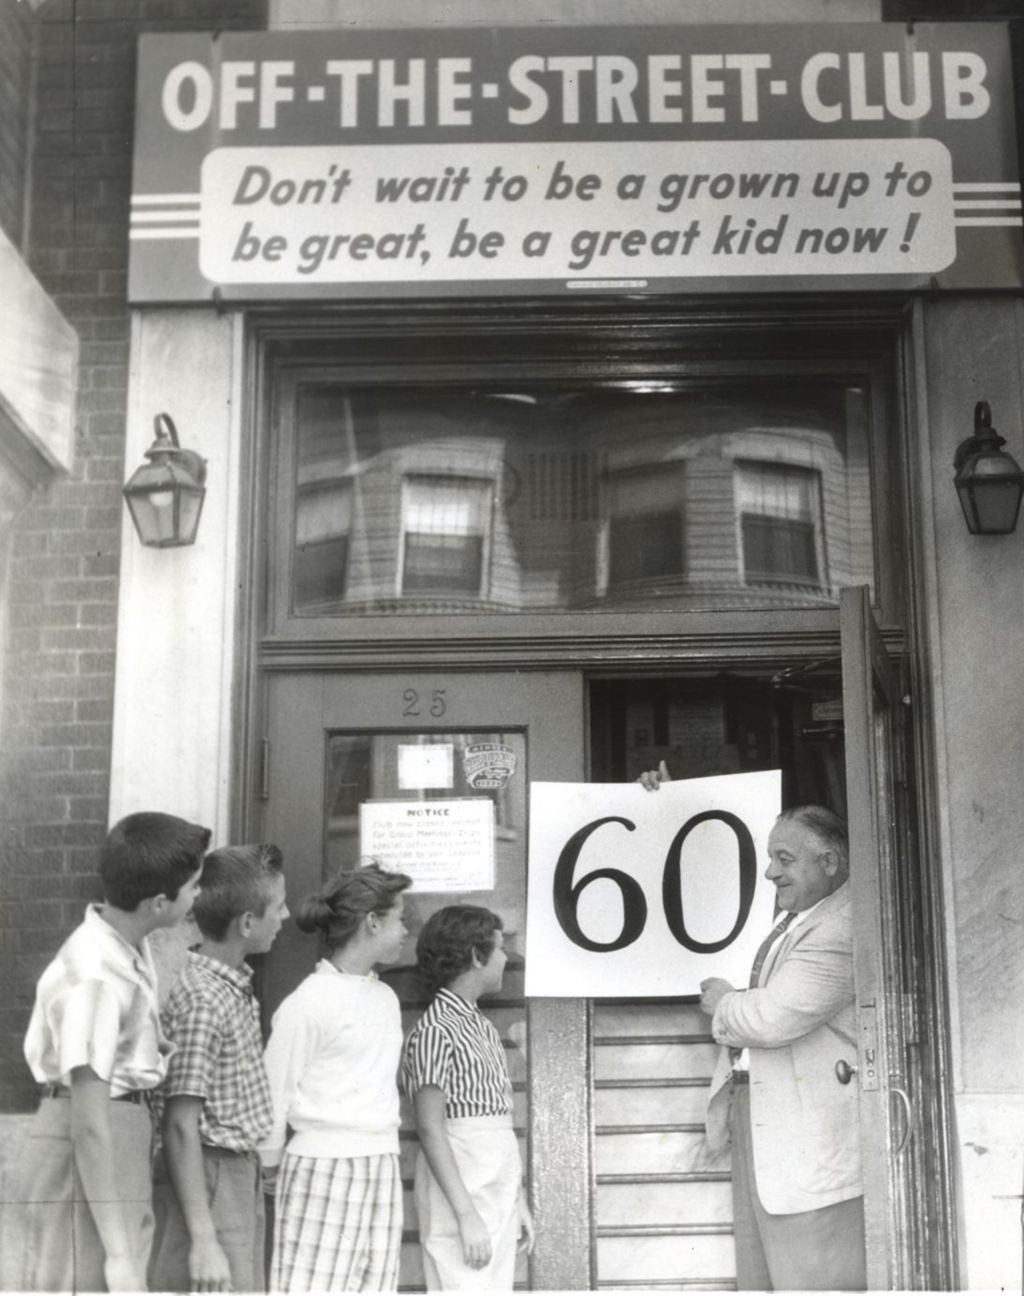 Auguste Mathieu holding a "60" sign at Off-The-Street Club entrance